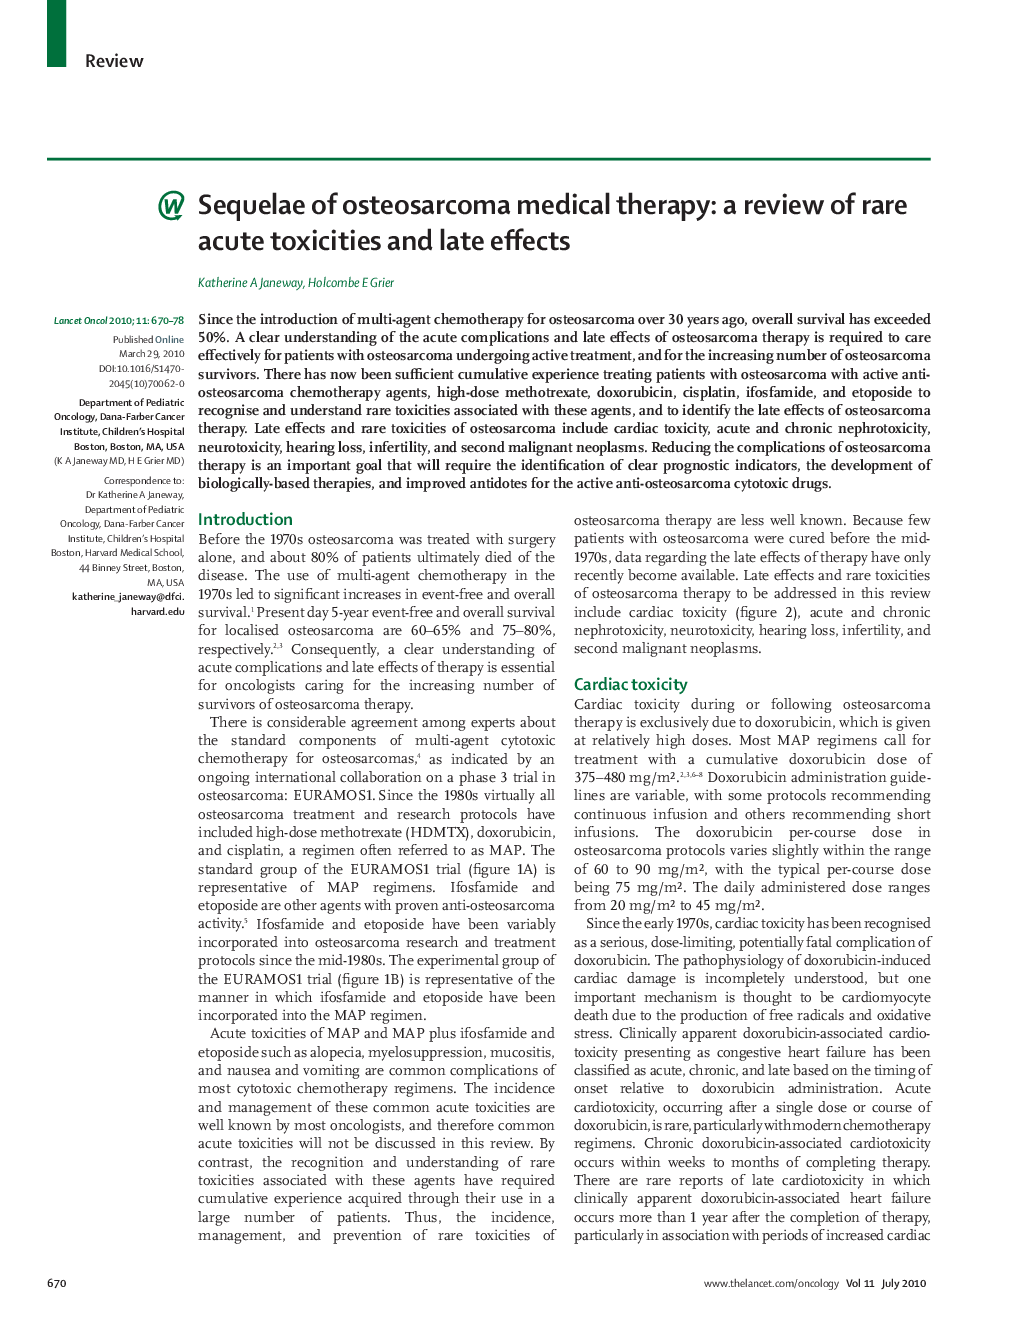 Sequelae of osteosarcoma medical therapy: a review of rare acute toxicities and late effects